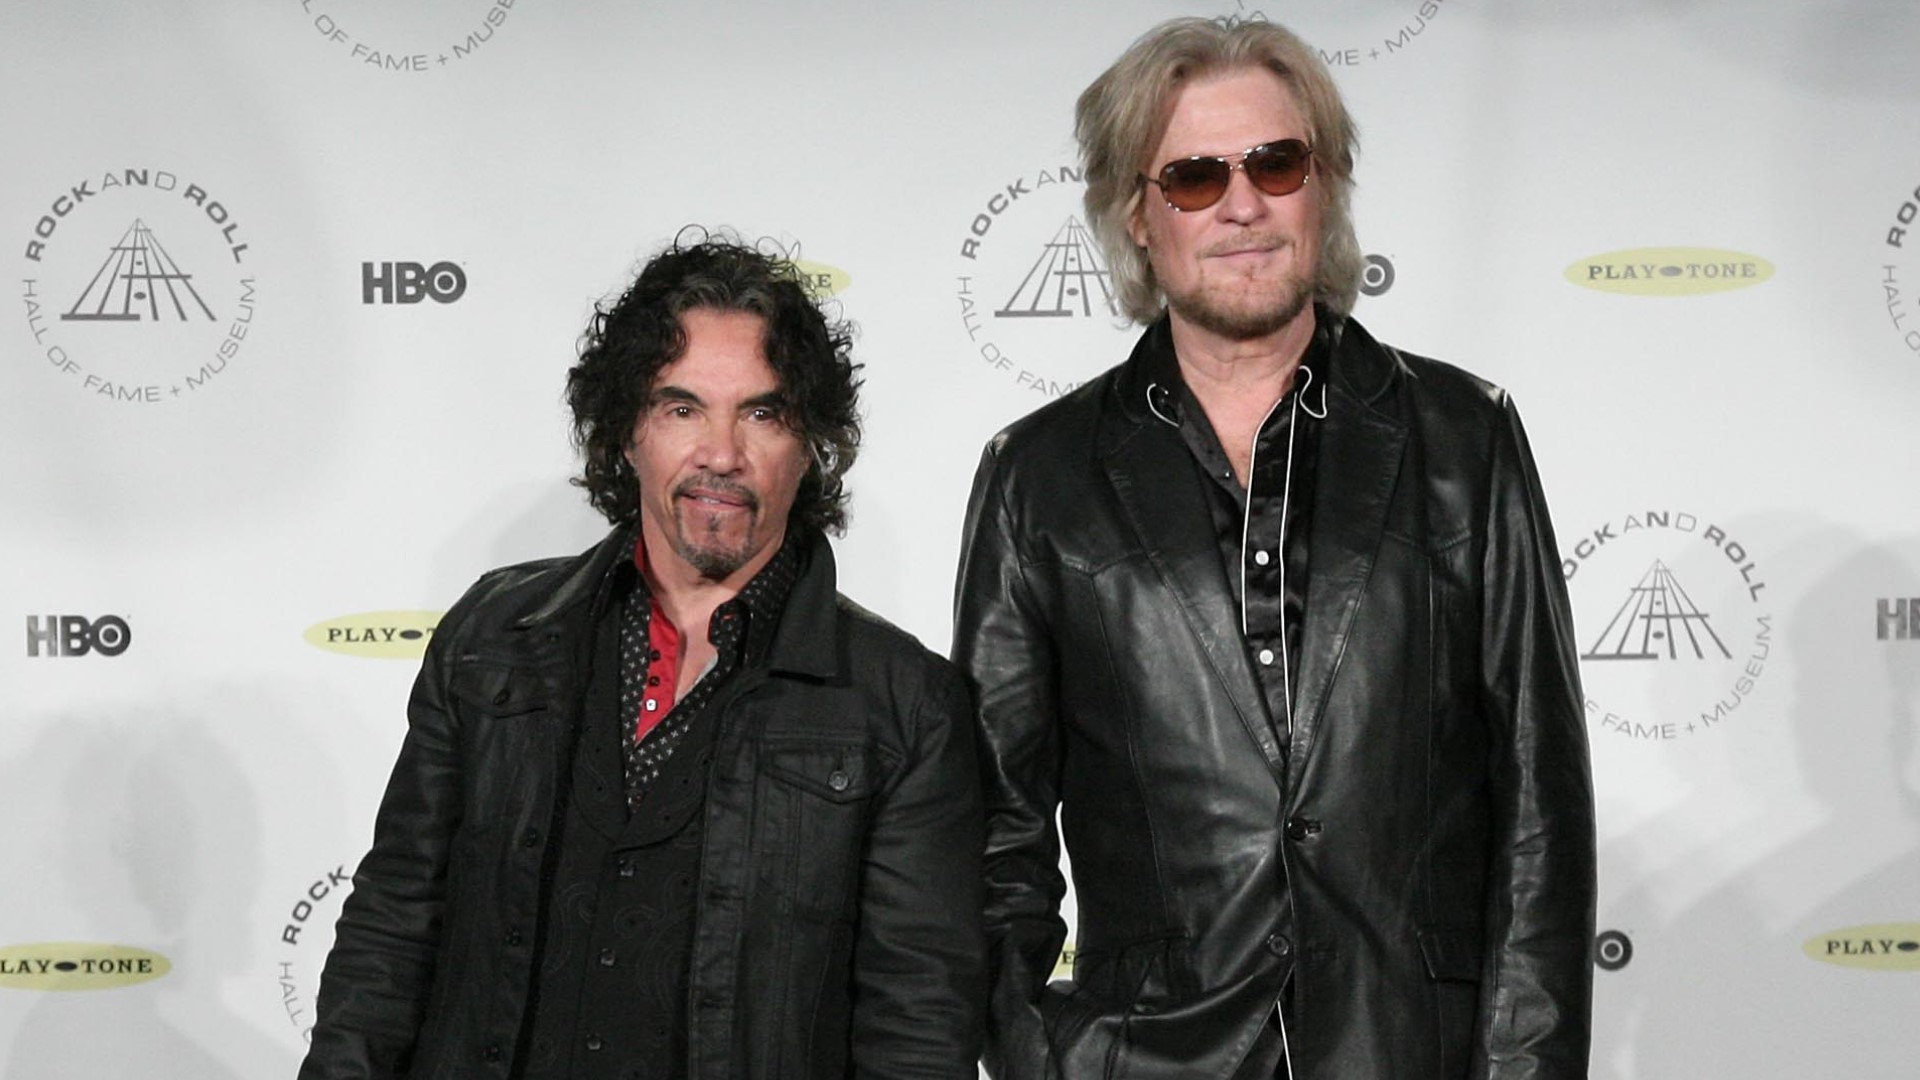 John Oates Responds To Daryl Hall Lawsuit With A Call For Compassion